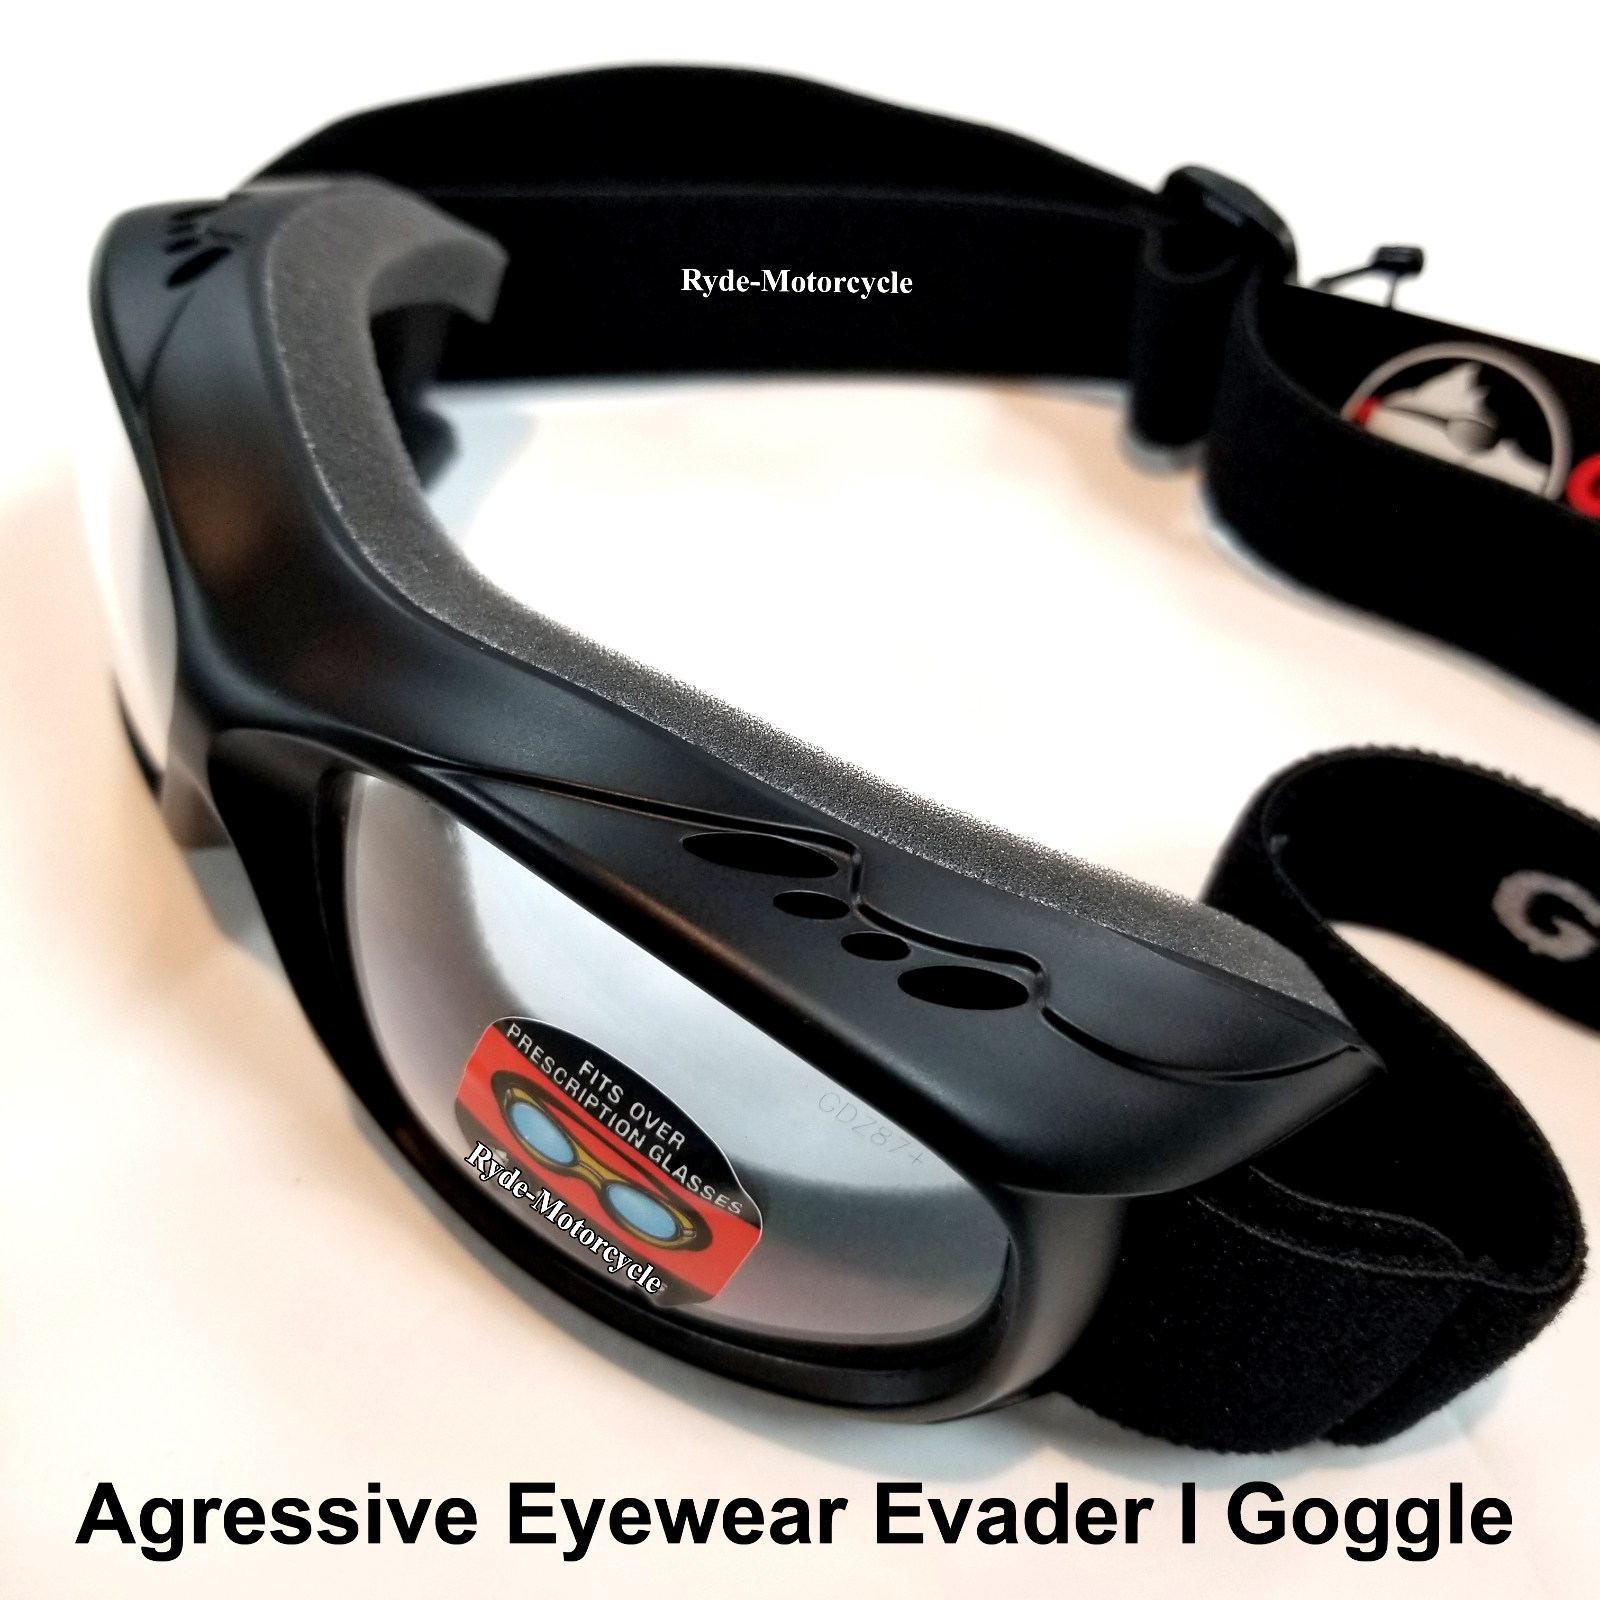 Guard-Dogs Evader-1 Clear OTG Goggles